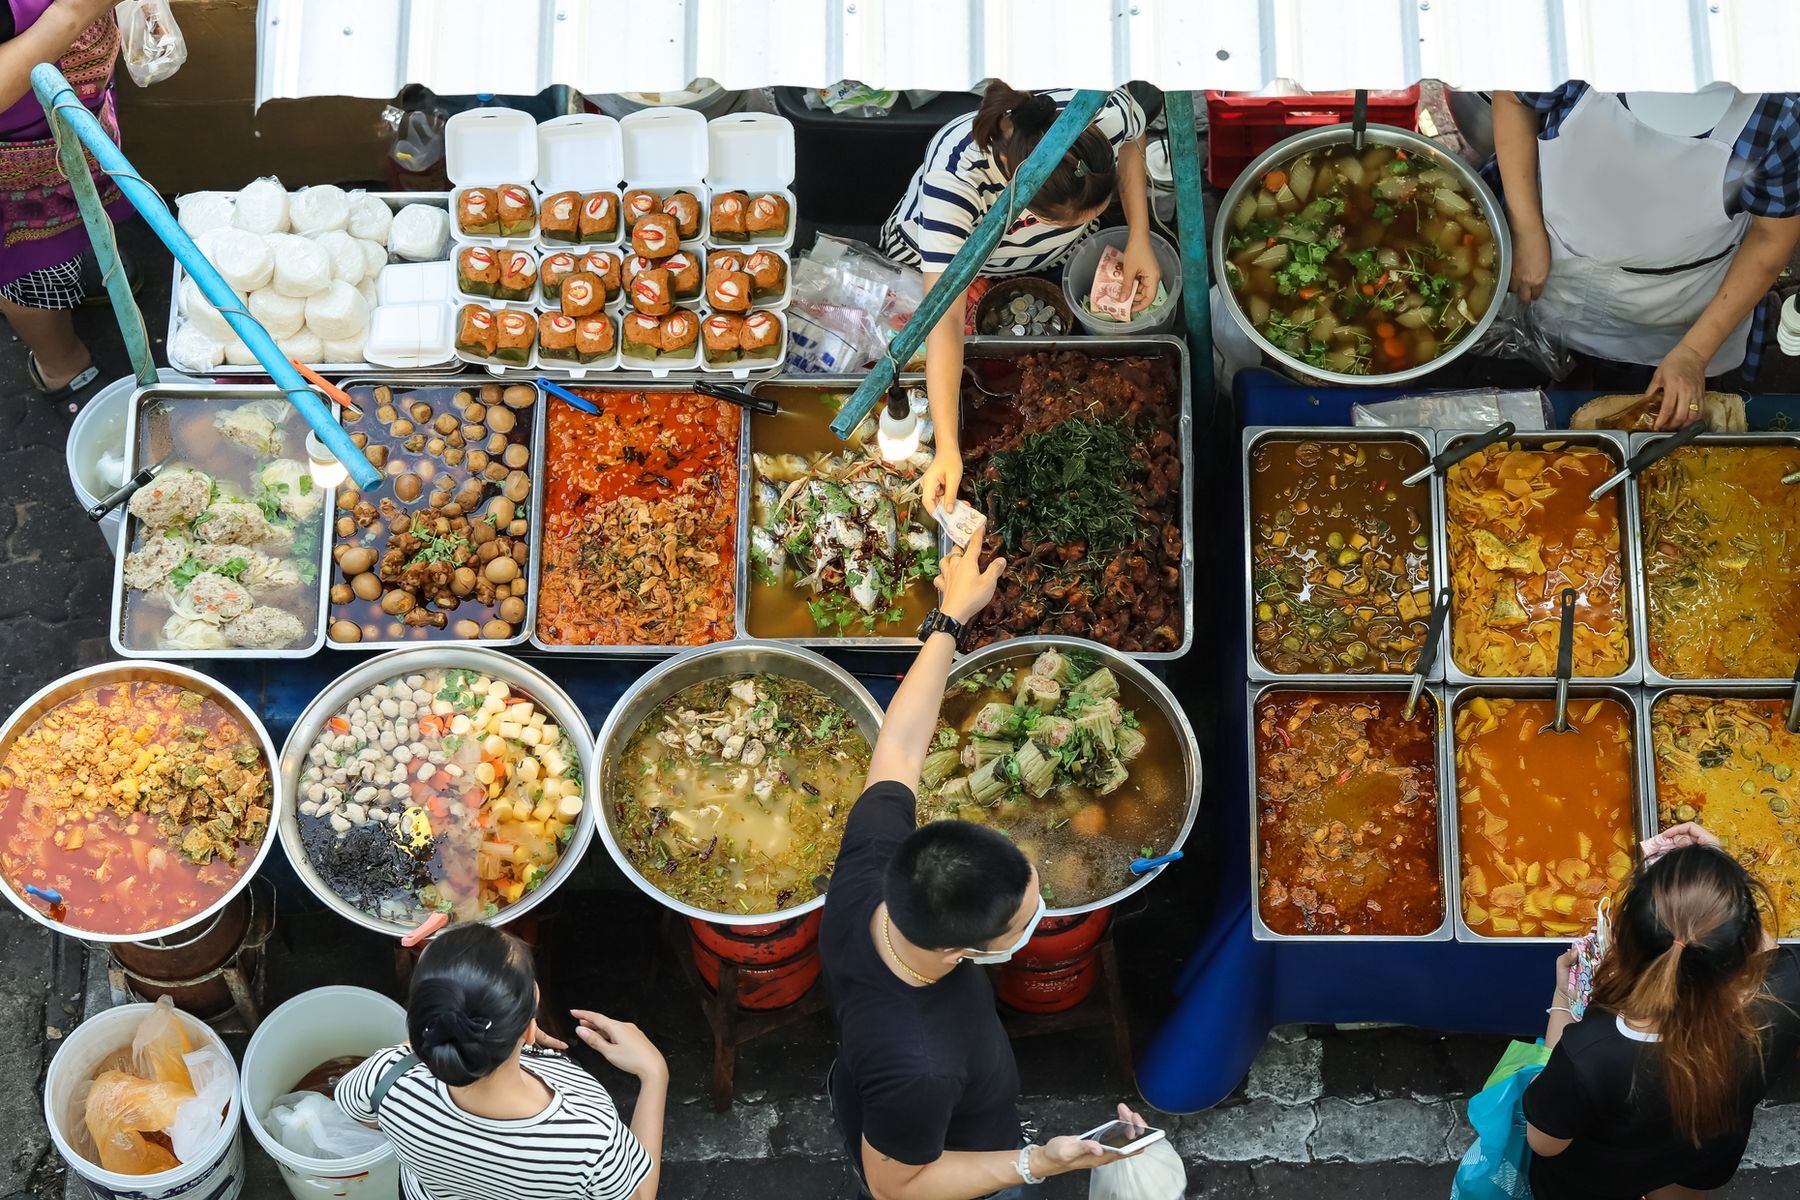 Monthly minimum: $248 Bangkok’s Chinatown District (known to locals as Yaowarat) is considered the birthplace of street food, with more than <a href="https://www.bangkokpost.com/thailand/general/1582794/street-vendor-rules-in-bangkok-hurting-tourism" rel="noreferrer noopener">110,000 food vendors</a> today. As such, the city has a rich history of providing delicious food at affordable prices, and that includes groceries.